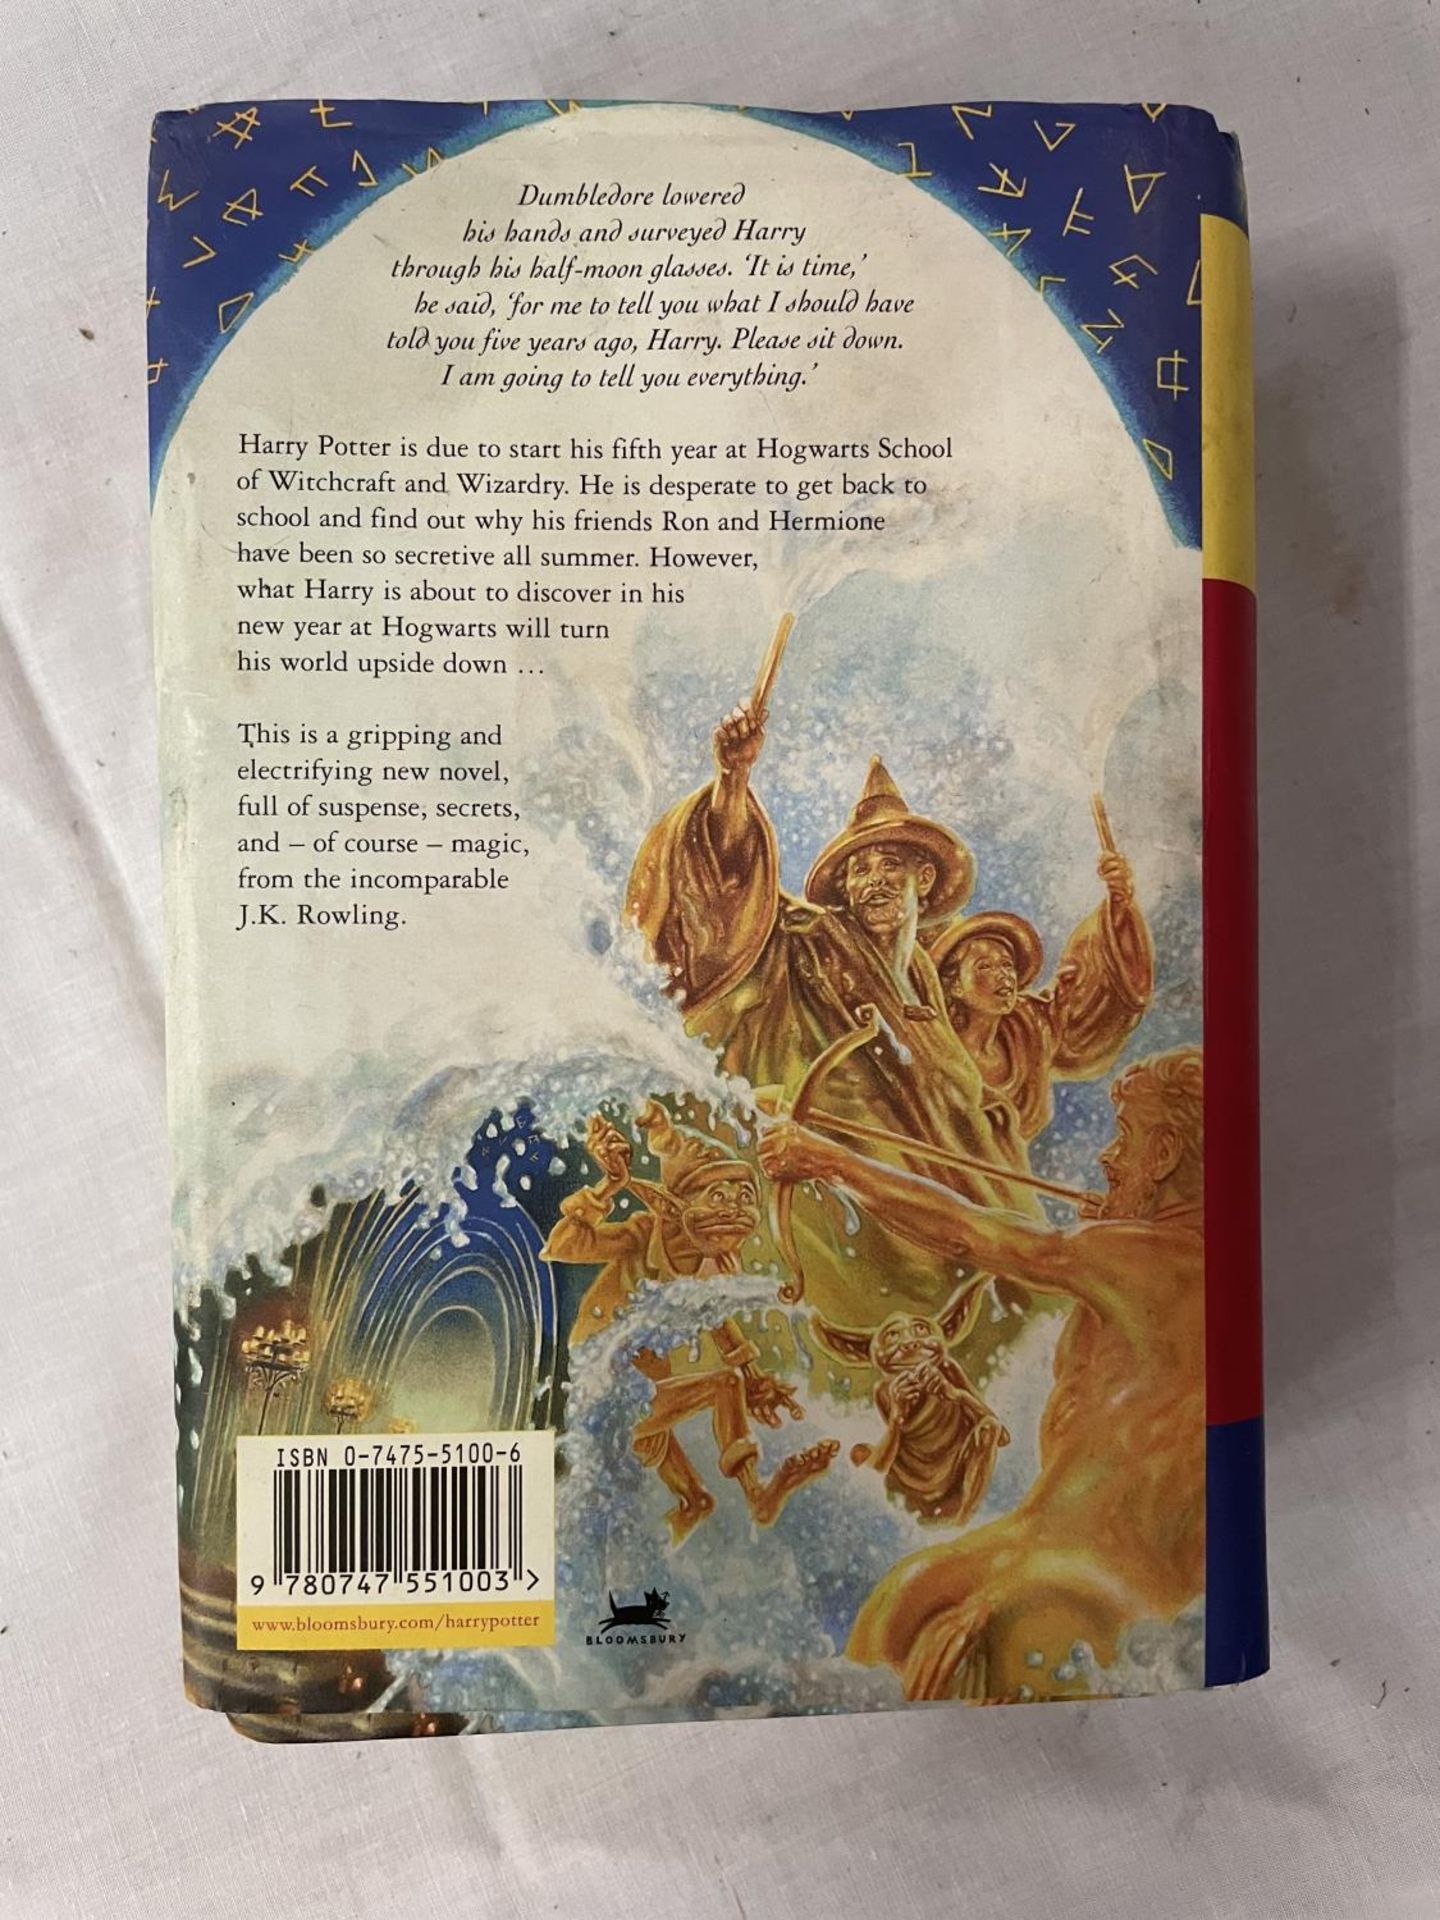 A FIRST EDITION HARRY POTTER AND THE ORDER OF THE PHOENIX HARD BACKED BOOK - Image 3 of 4